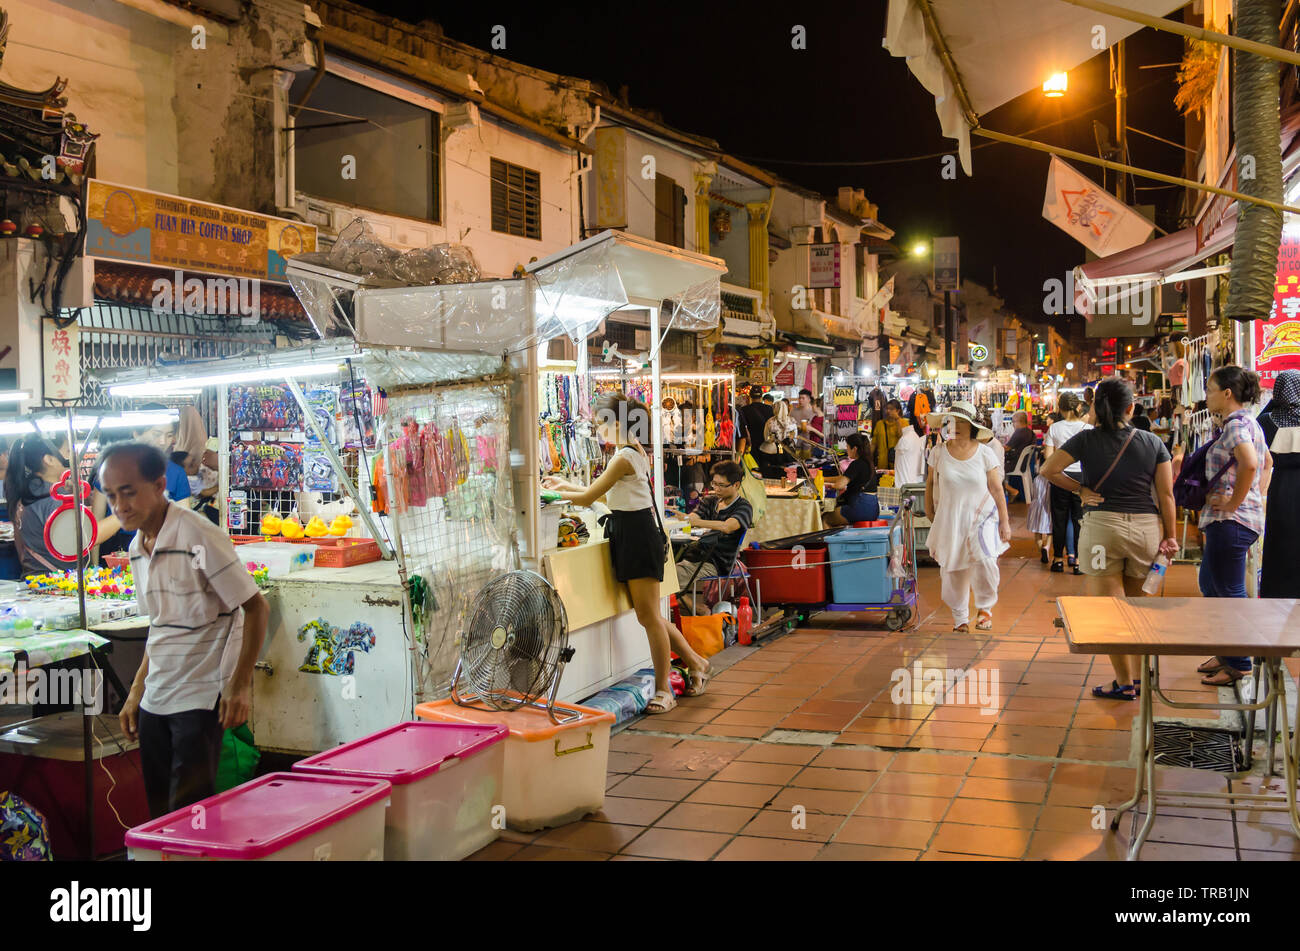 Malacca,Malaysia - April 21,2019 : The night market on Friday,Saturday and Sunday is the best part of the Jonker Street, it sells everything from tast Stock Photo